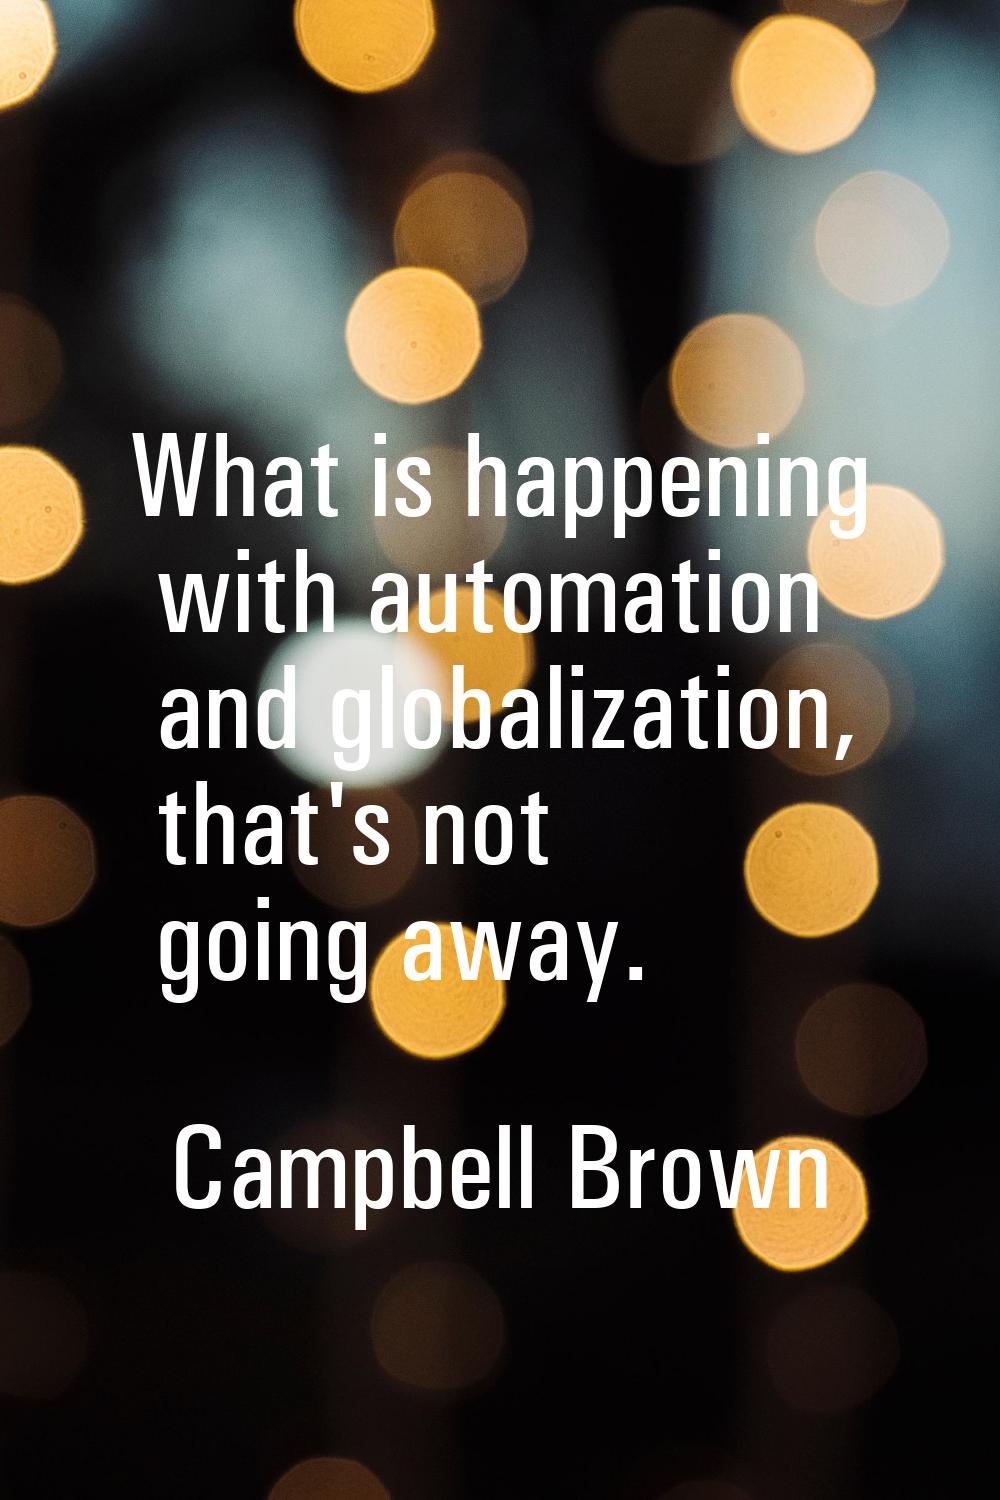 What is happening with automation and globalization, that's not going away.